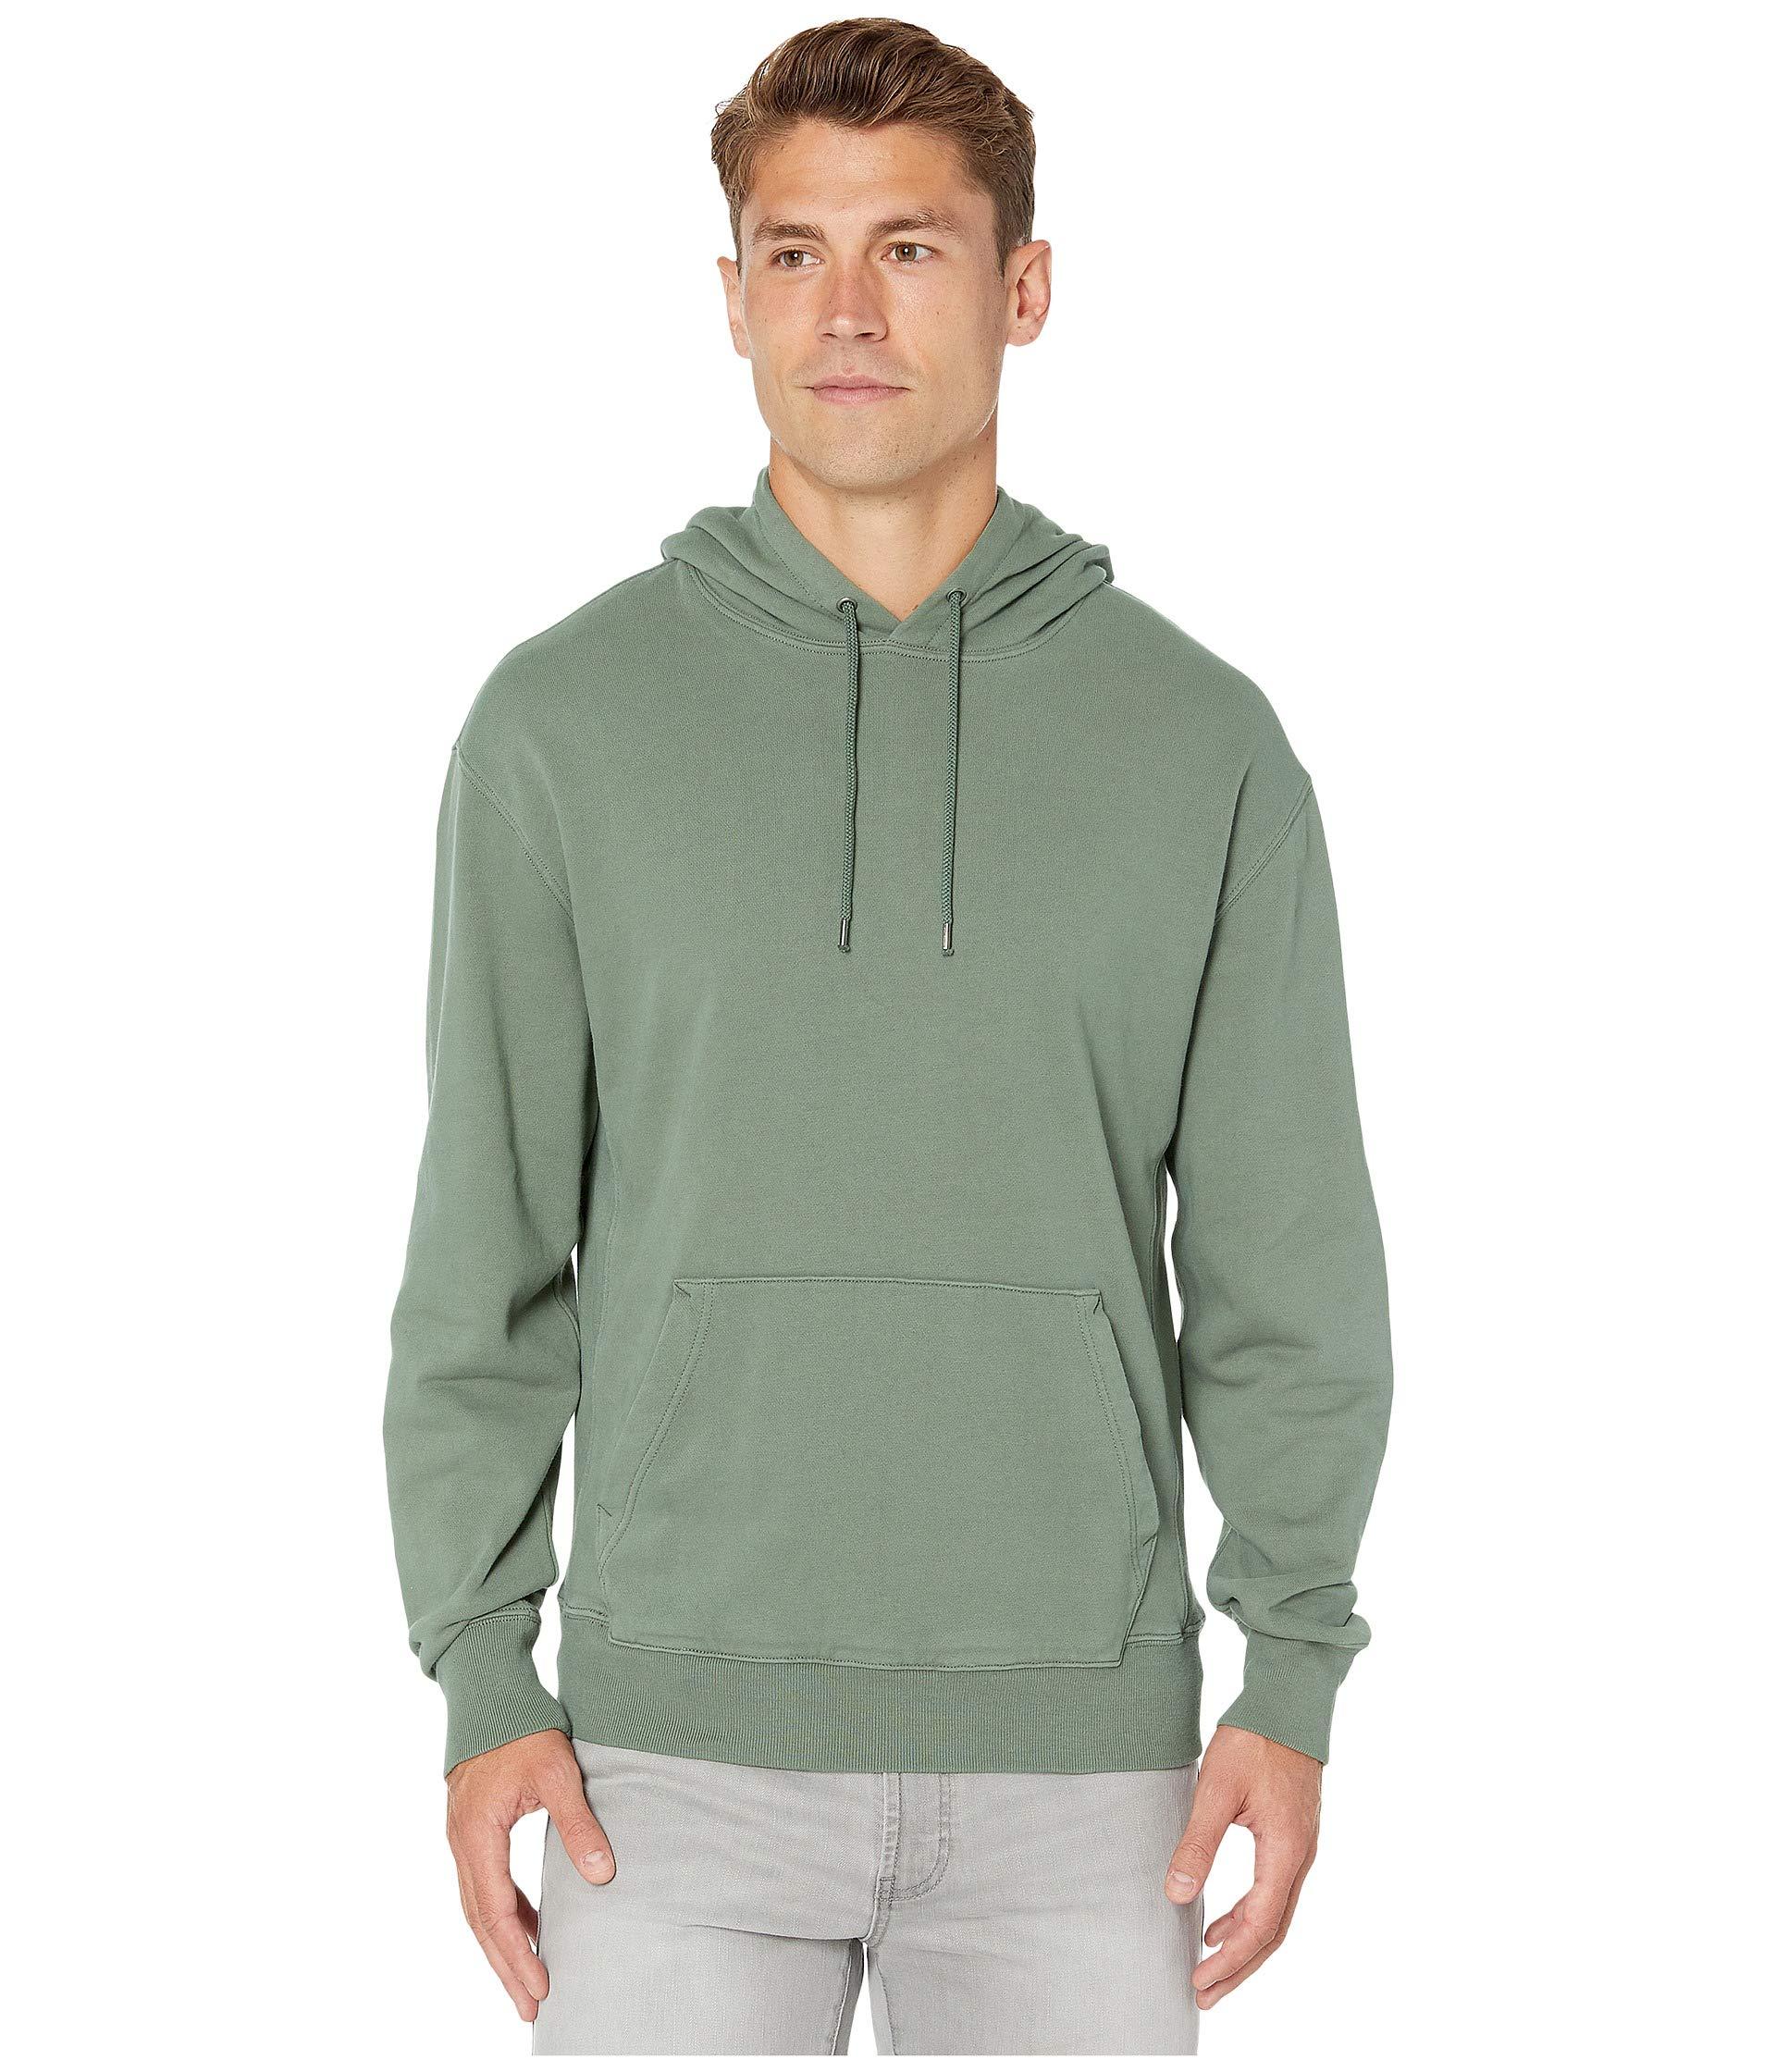 J.Crew Cotton Garment-dyed French Terry Hoodie in Green for Men - Lyst